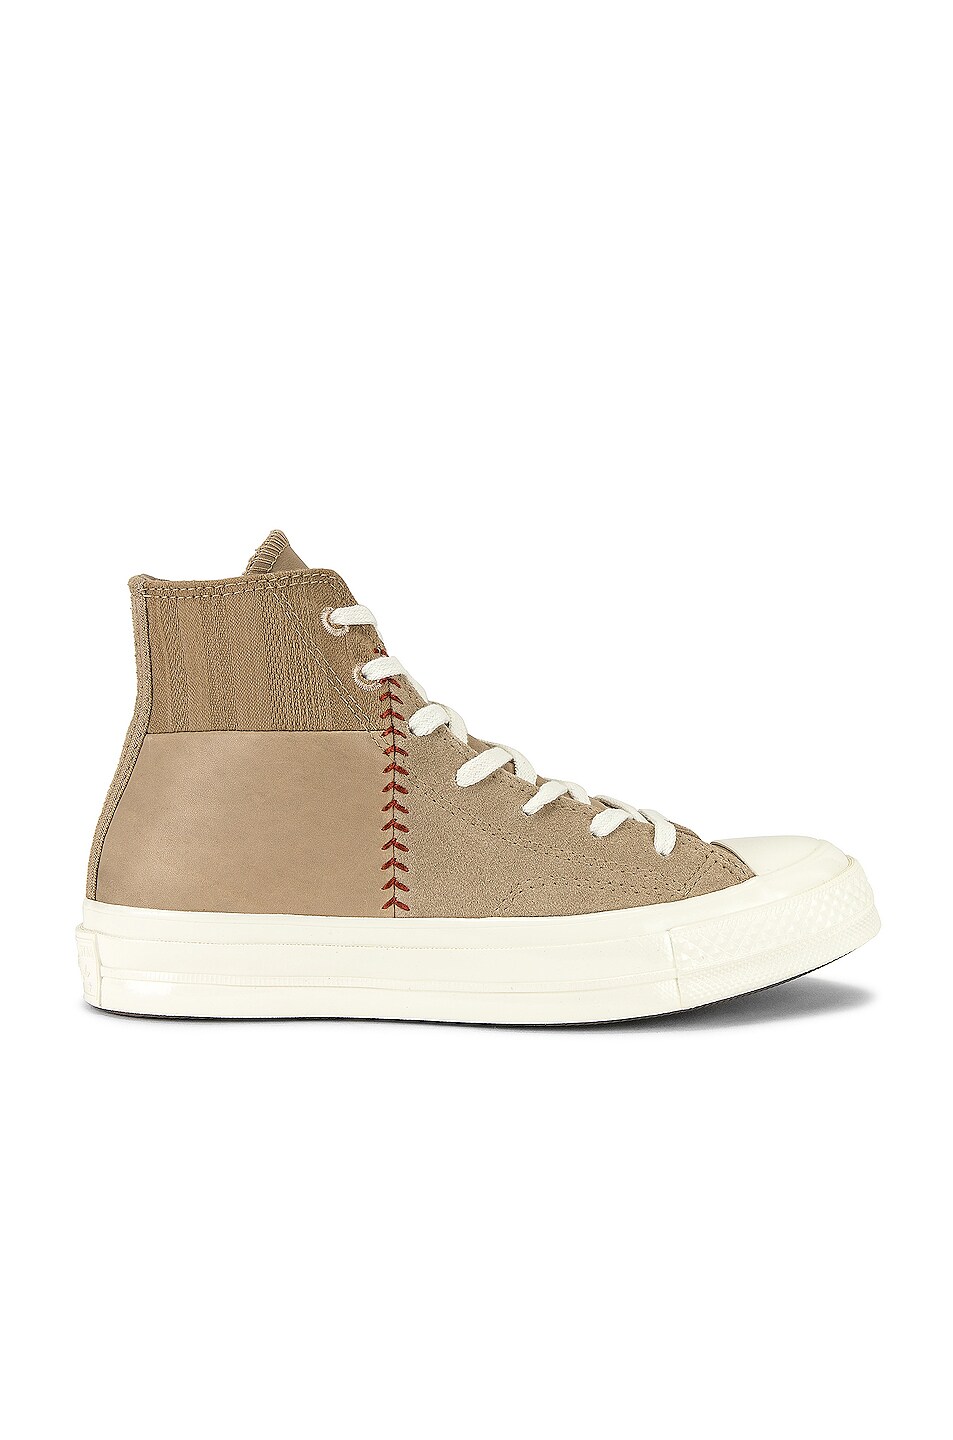 Image 1 of Converse Chuck 70 Crafted Split Construction in Nomad Khaki & Dark Terracotta